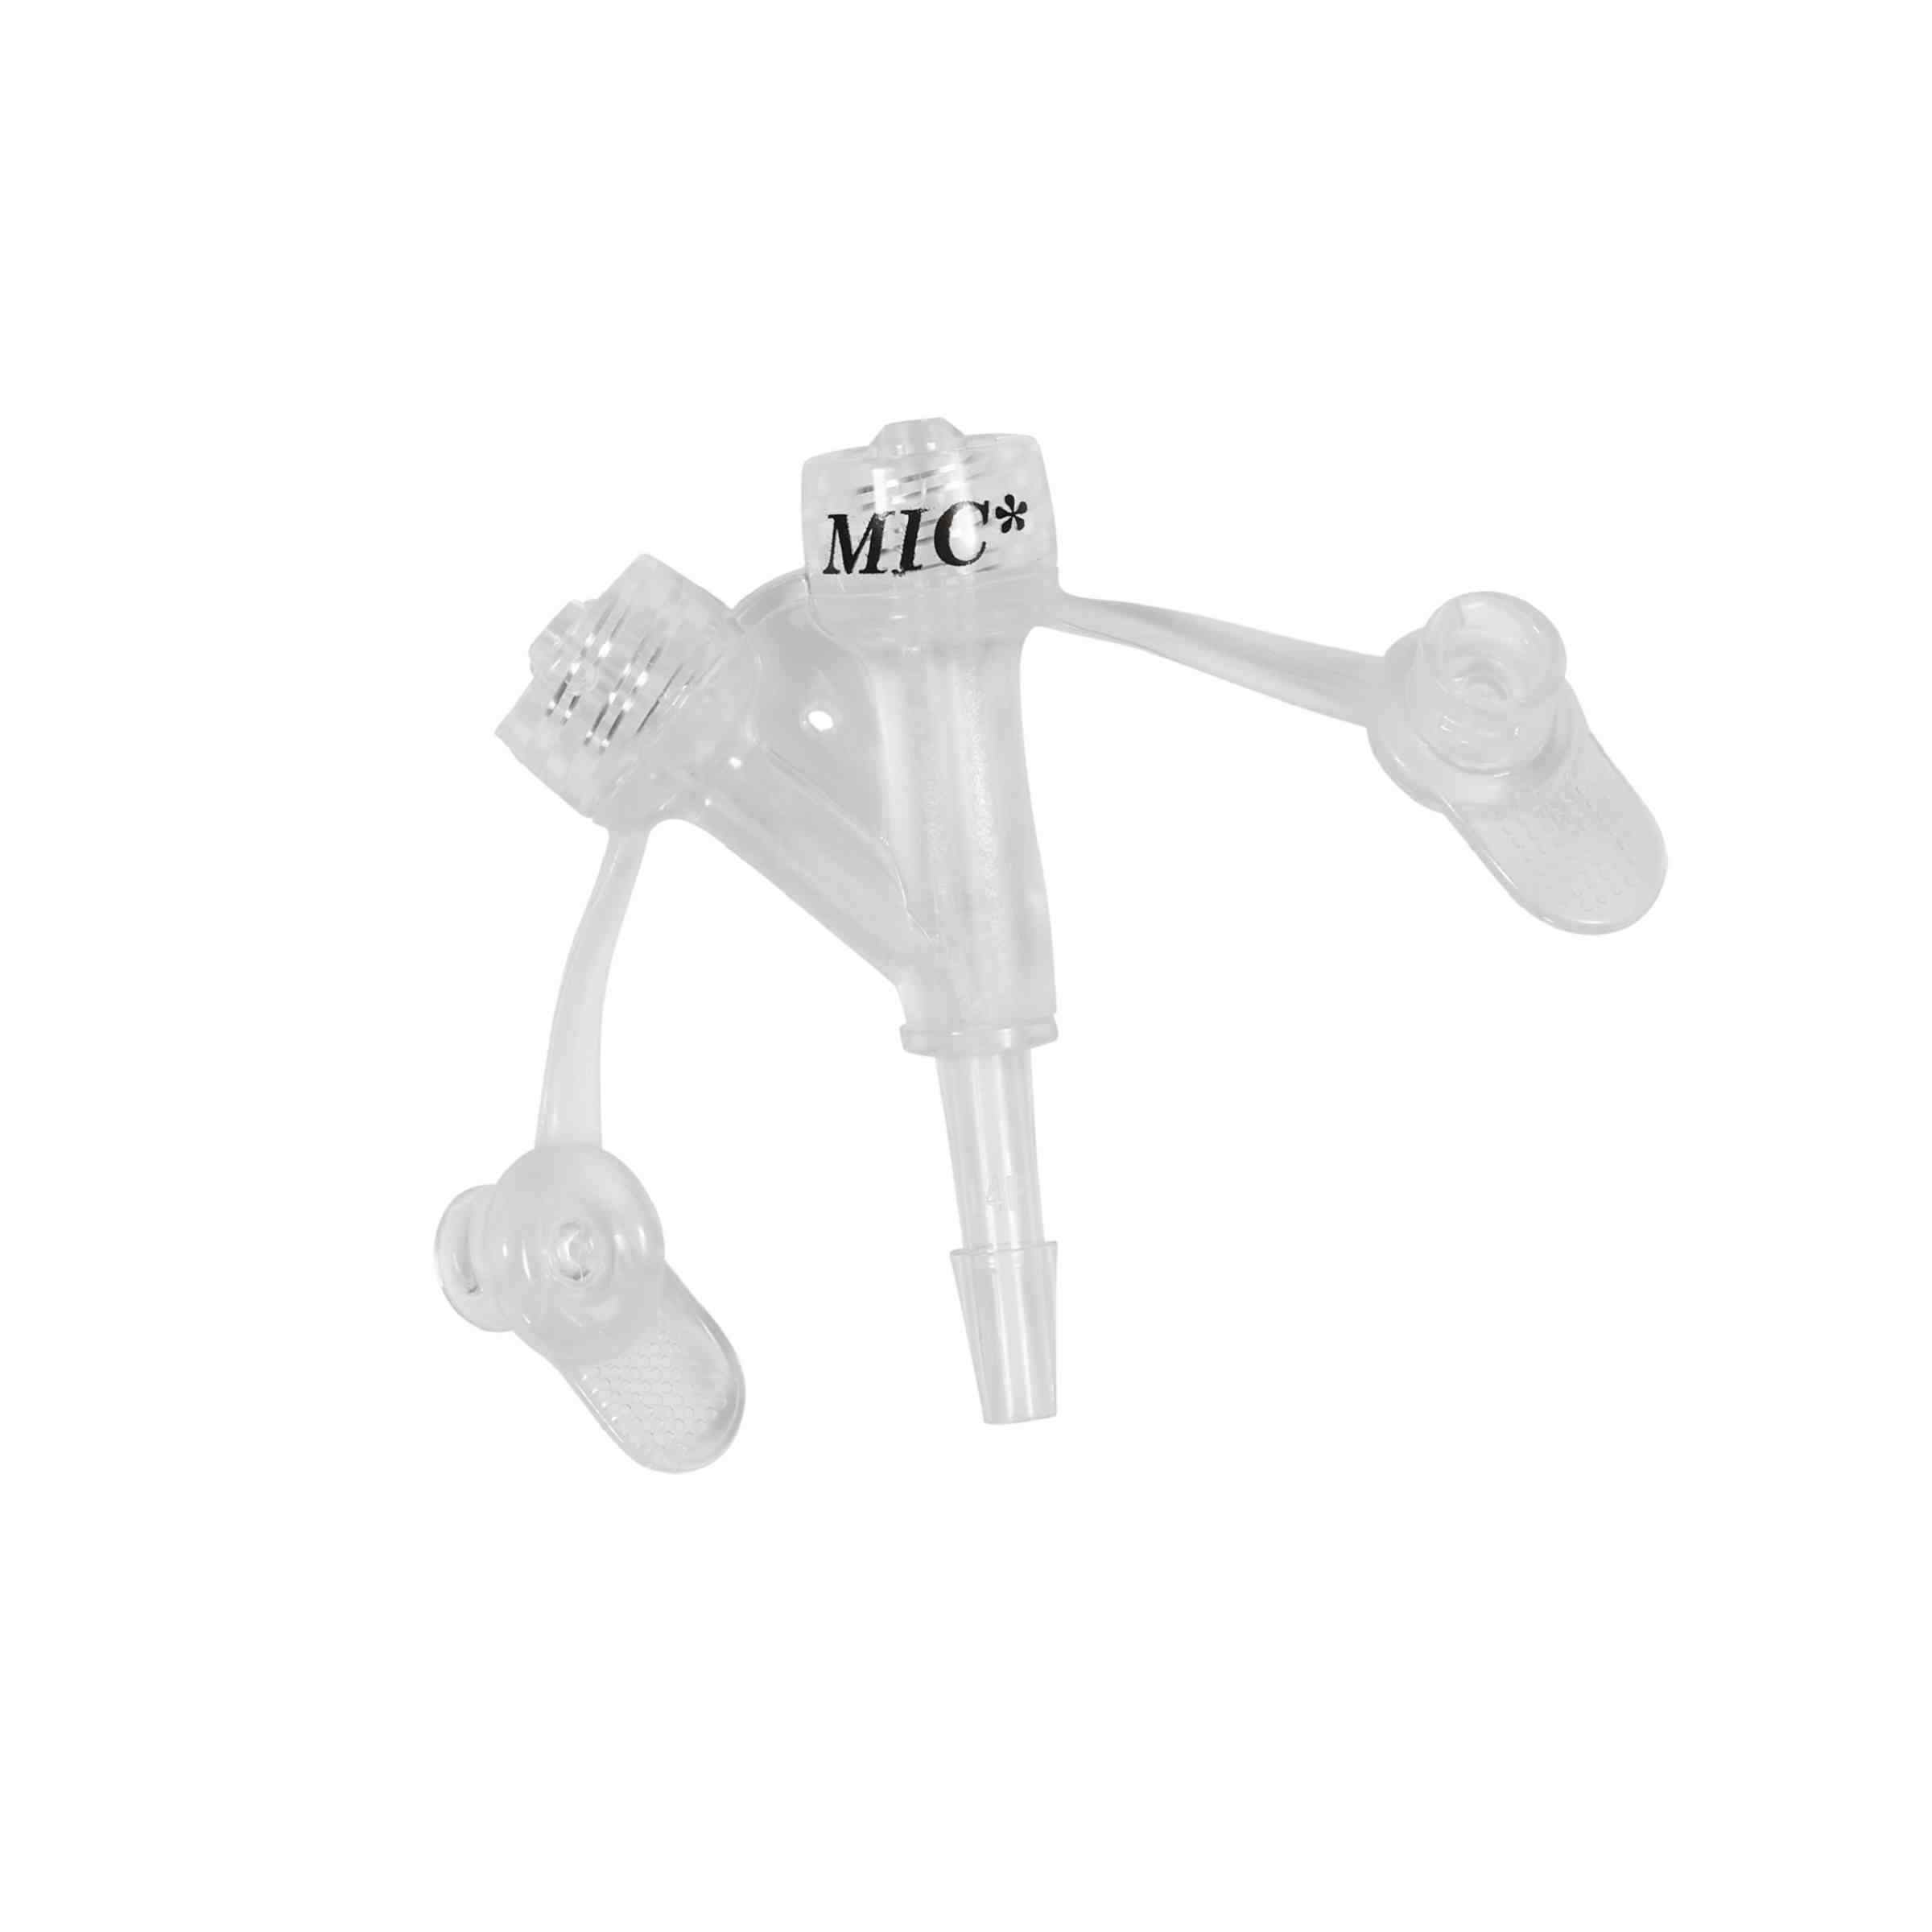 MIC PEG Replacement Feeding Adapter with ENFit Connectors, 8135-14, 14 Fr - 1 Each